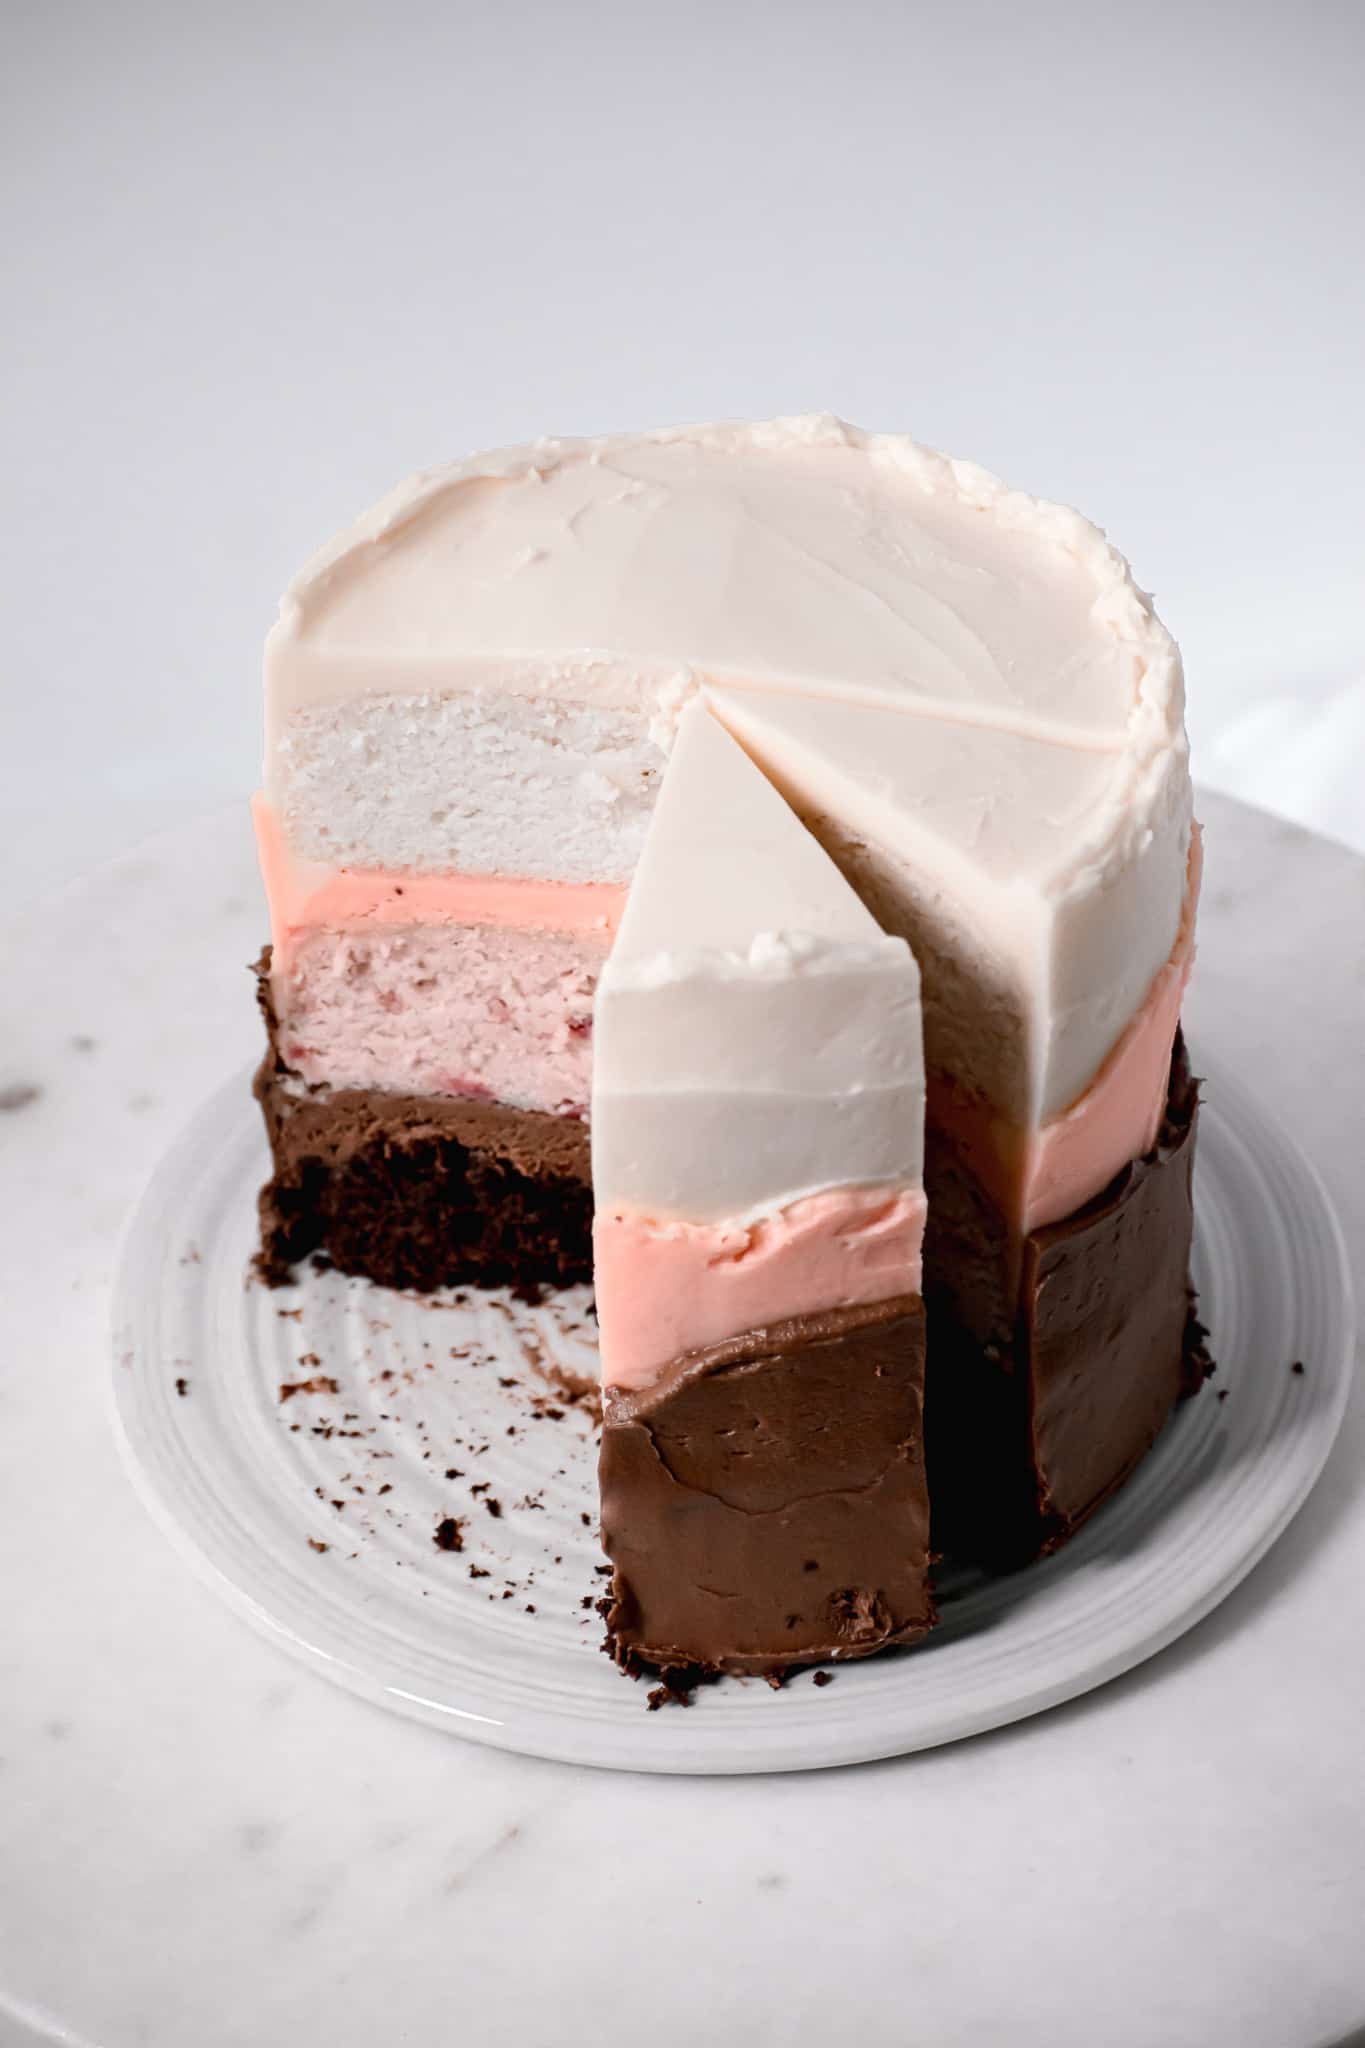 neapolitan cake with swiss meringue buttercream with slices taken out.